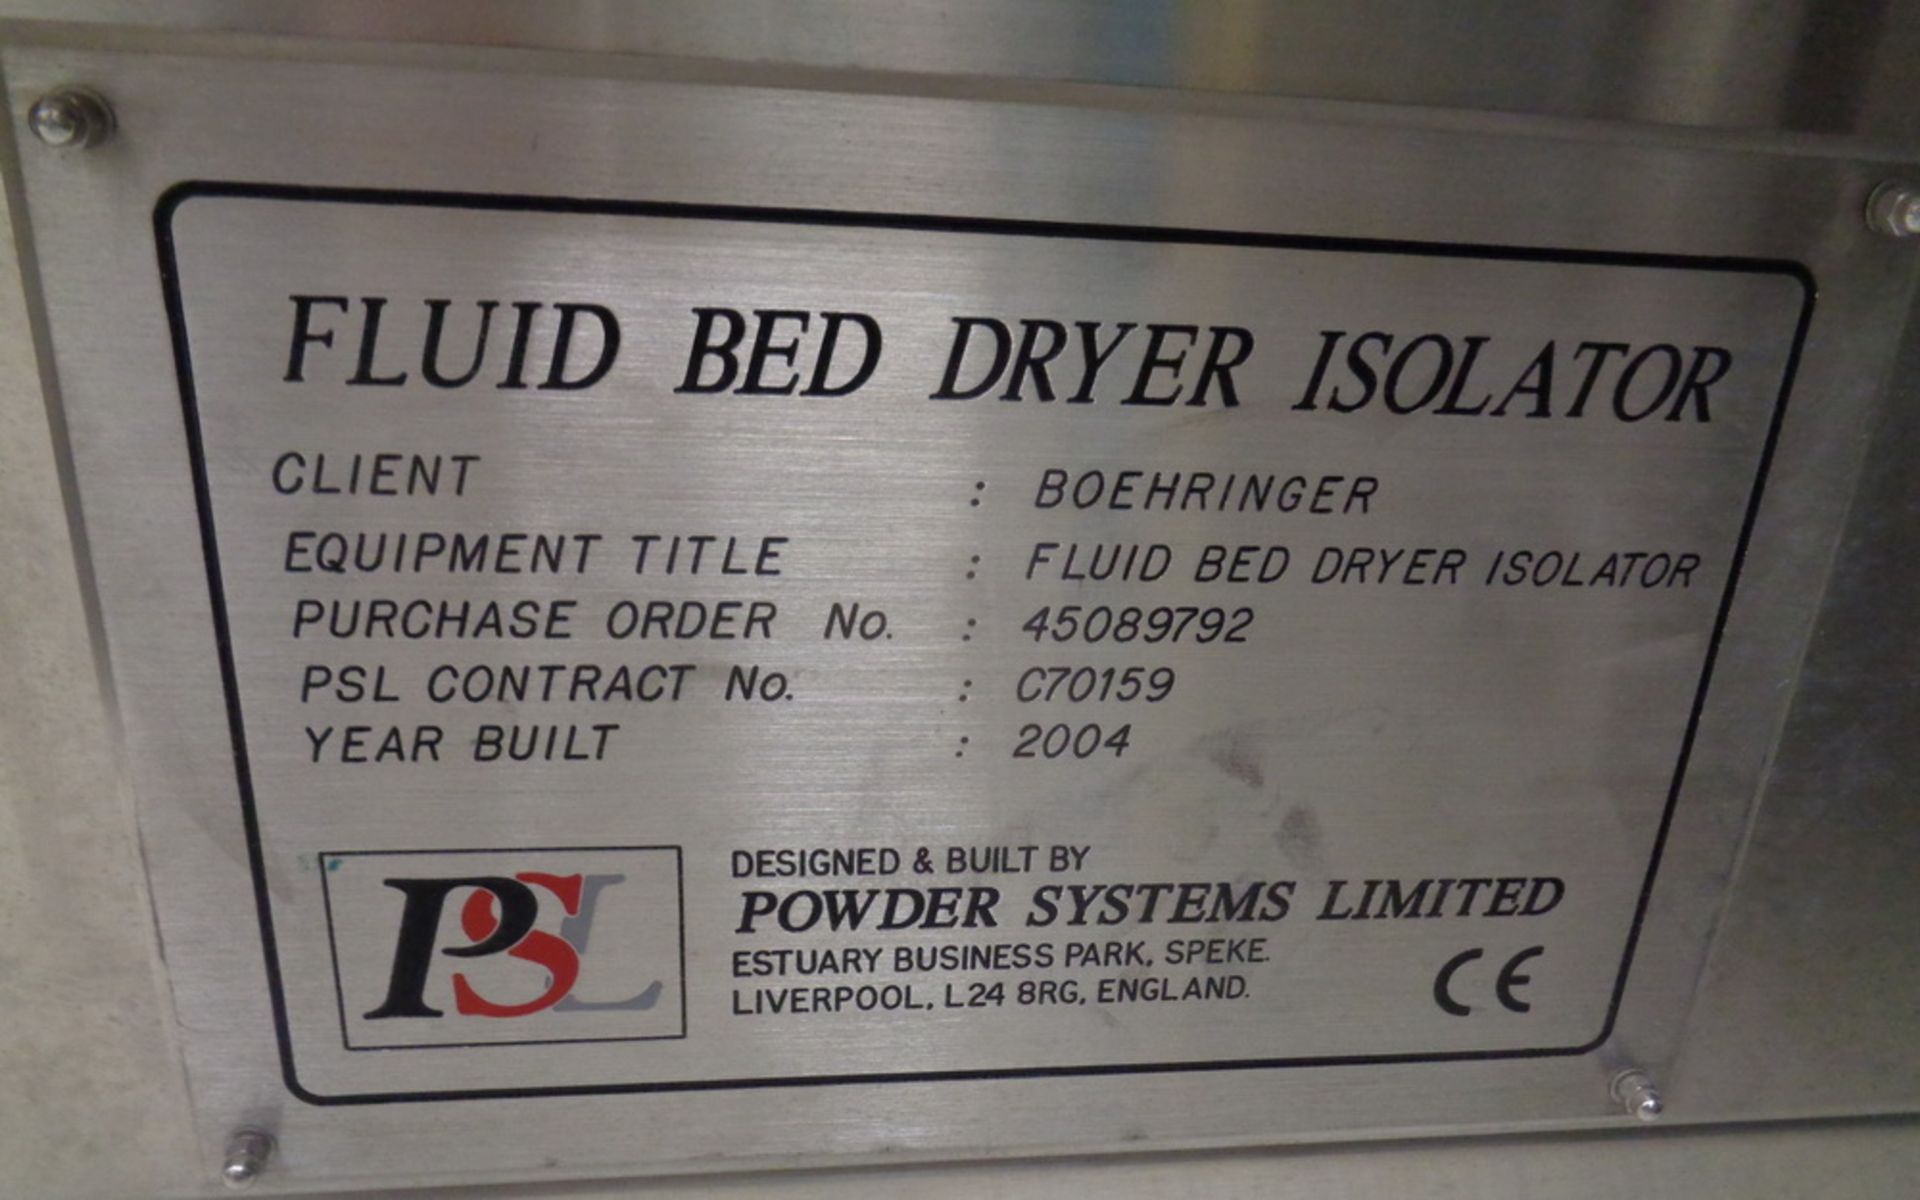 Powder Systems Limited (PSL) Stainless Steel Isolator. - Image 8 of 10